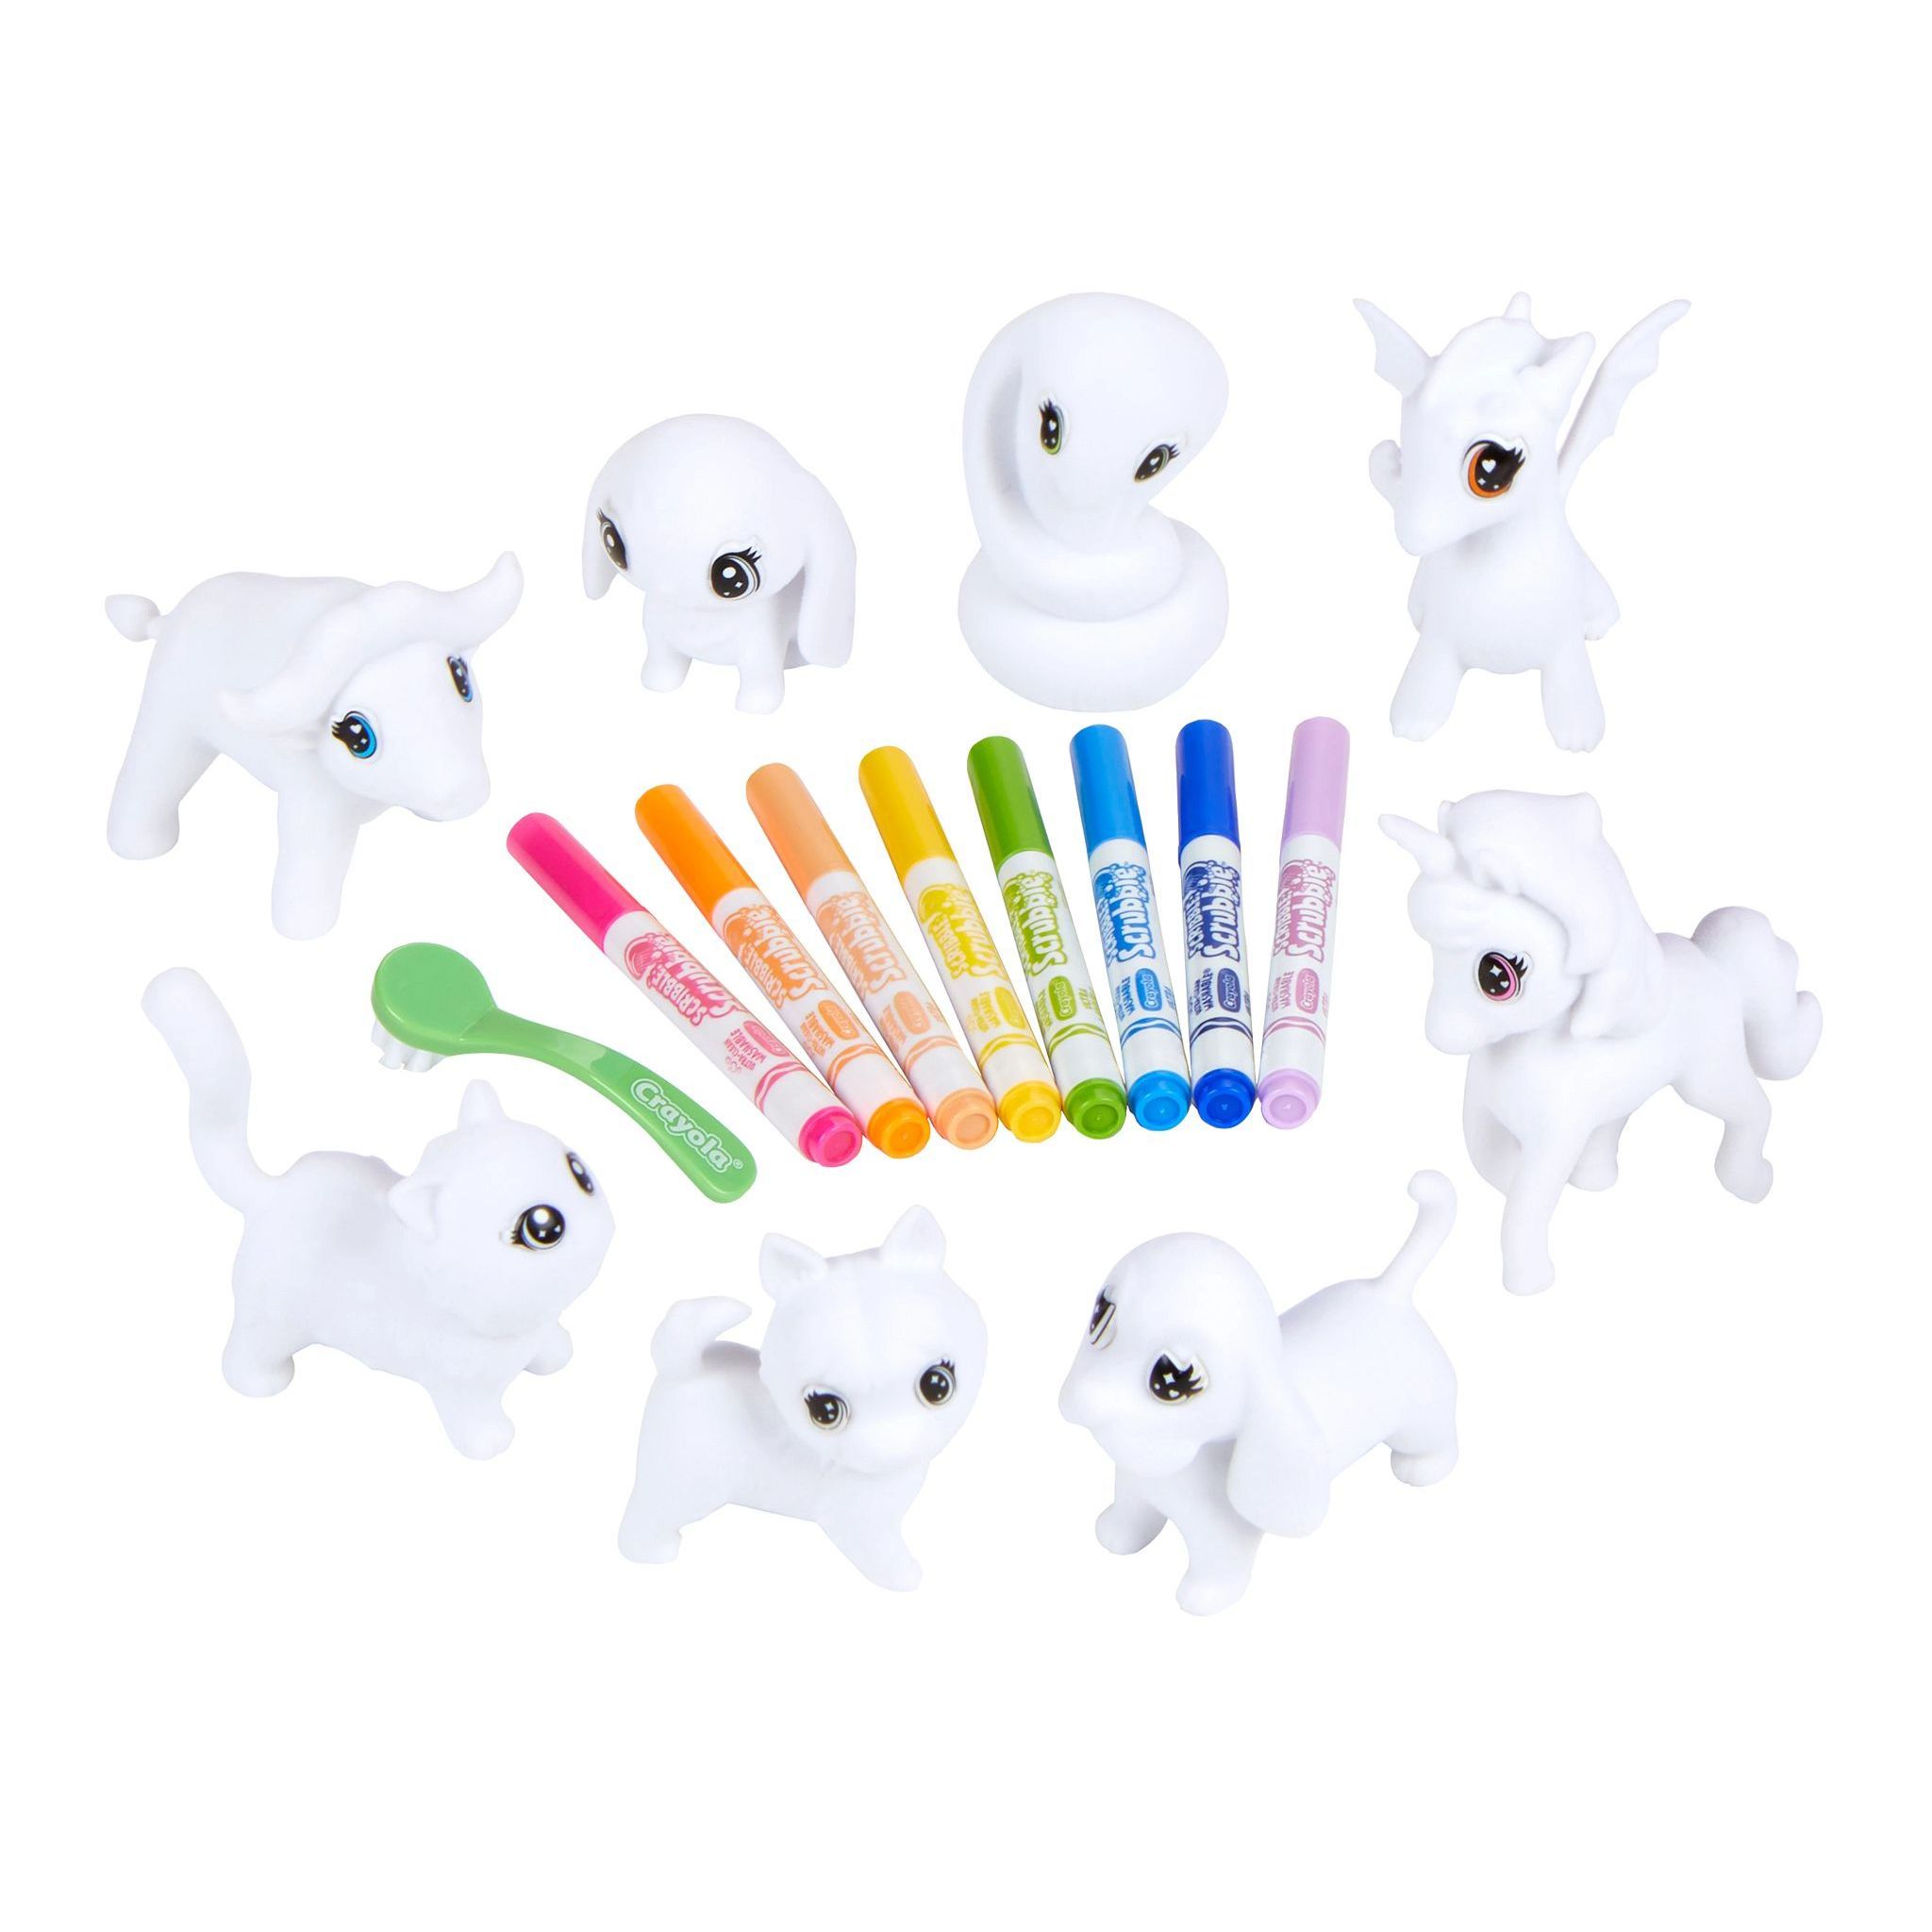 Crayola Scribble Scrubbie Pets, Coloring Toy Animal, Holiday Gift for Kids, Beginner Child - image 4 of 8